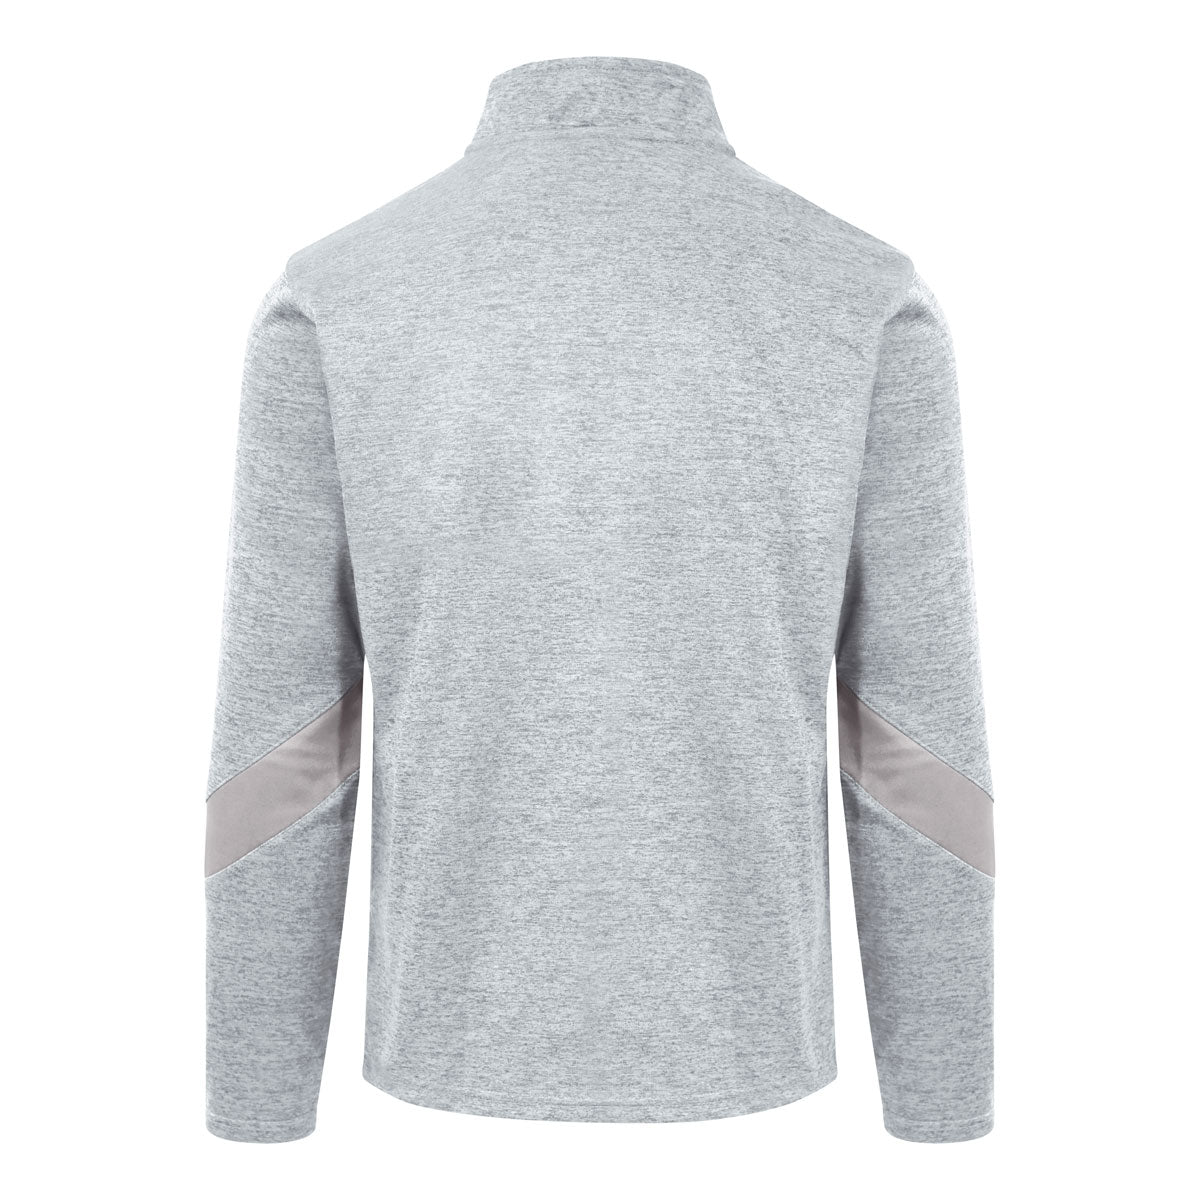 Mc Keever Mourneabbey LGFA Core 22 1/4 Zip Top - Youth - Grey